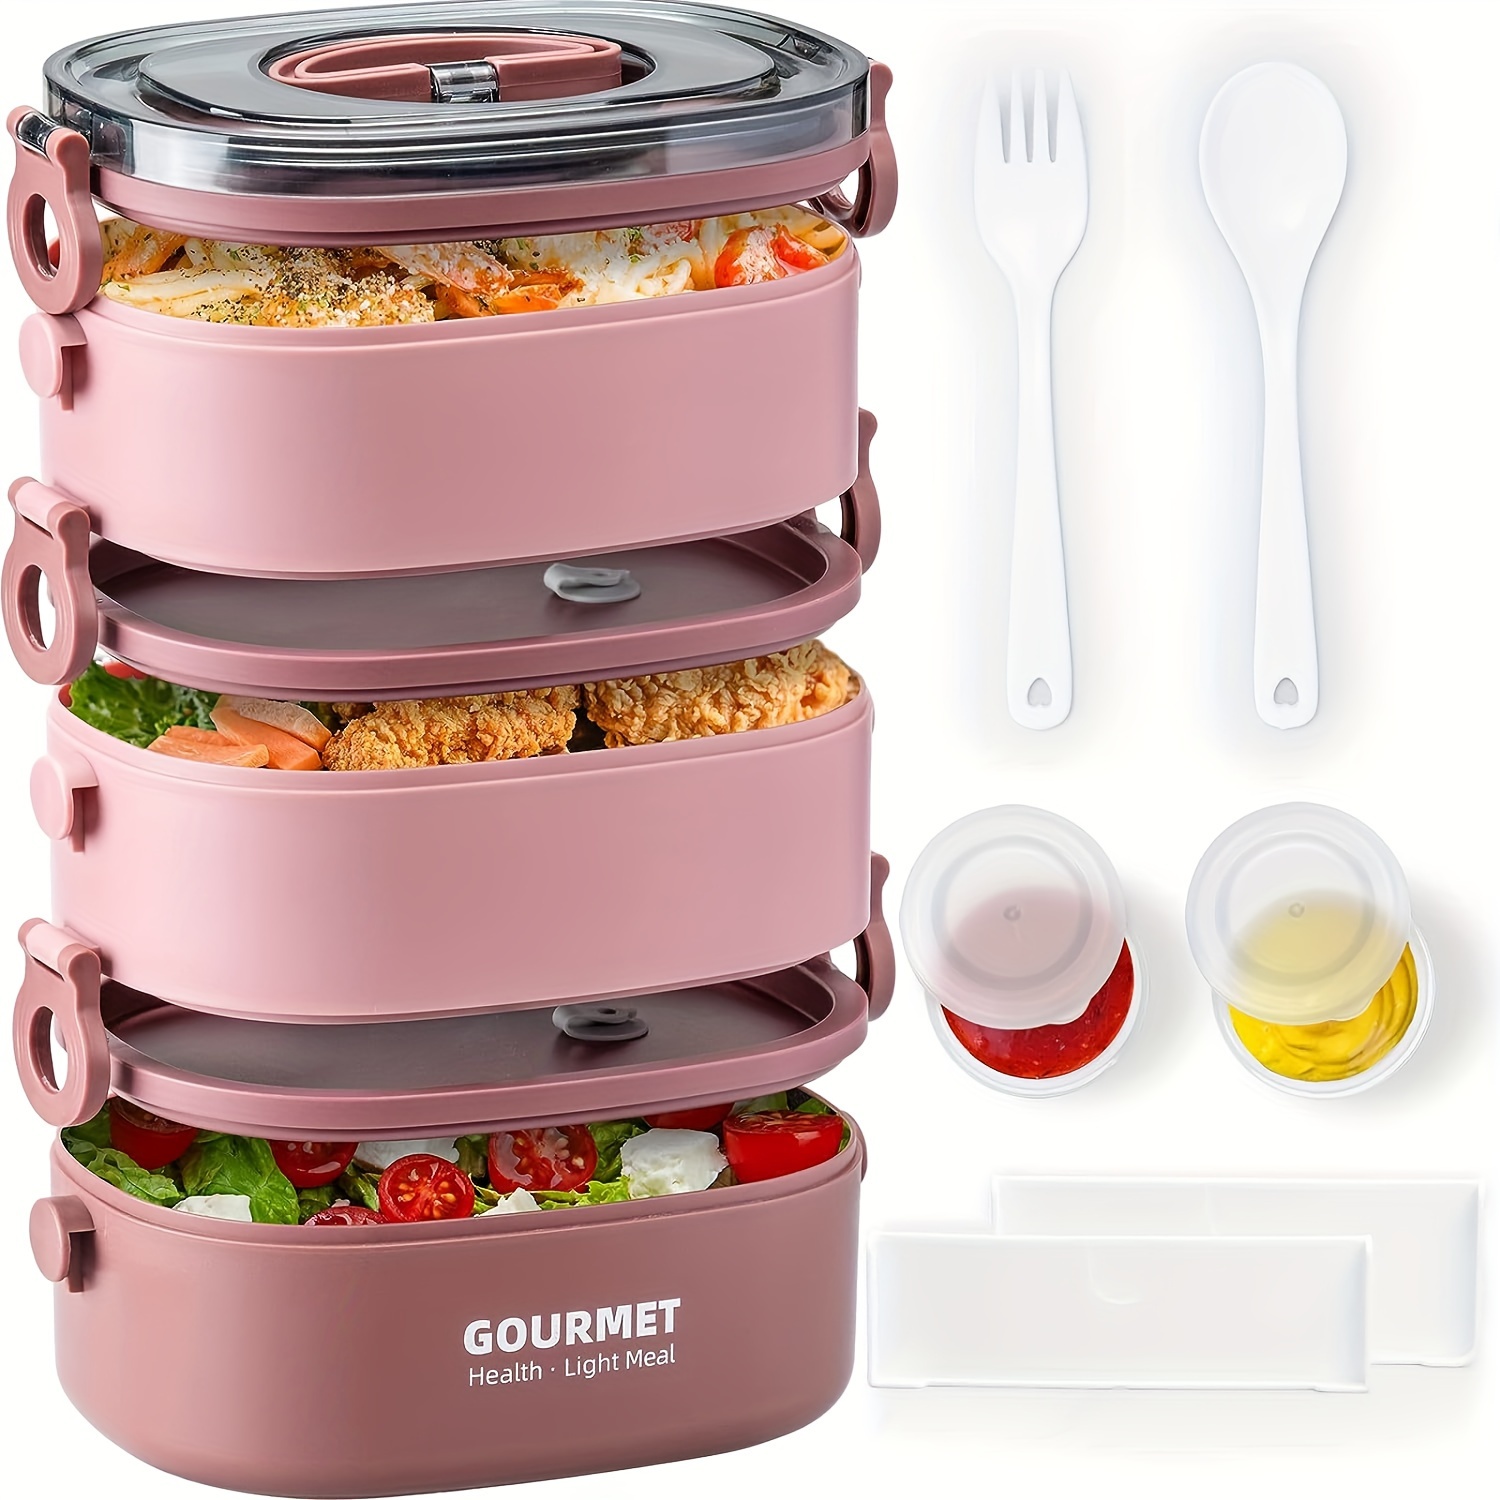 

1 Set Bento Box Lunch Box, Stackable 3 Layers Food Containers, Leak-proof Portable 2.80l Large Capacity Lunch Box, Microwave Safe Bento Box For Adults To Work School Camping-pink